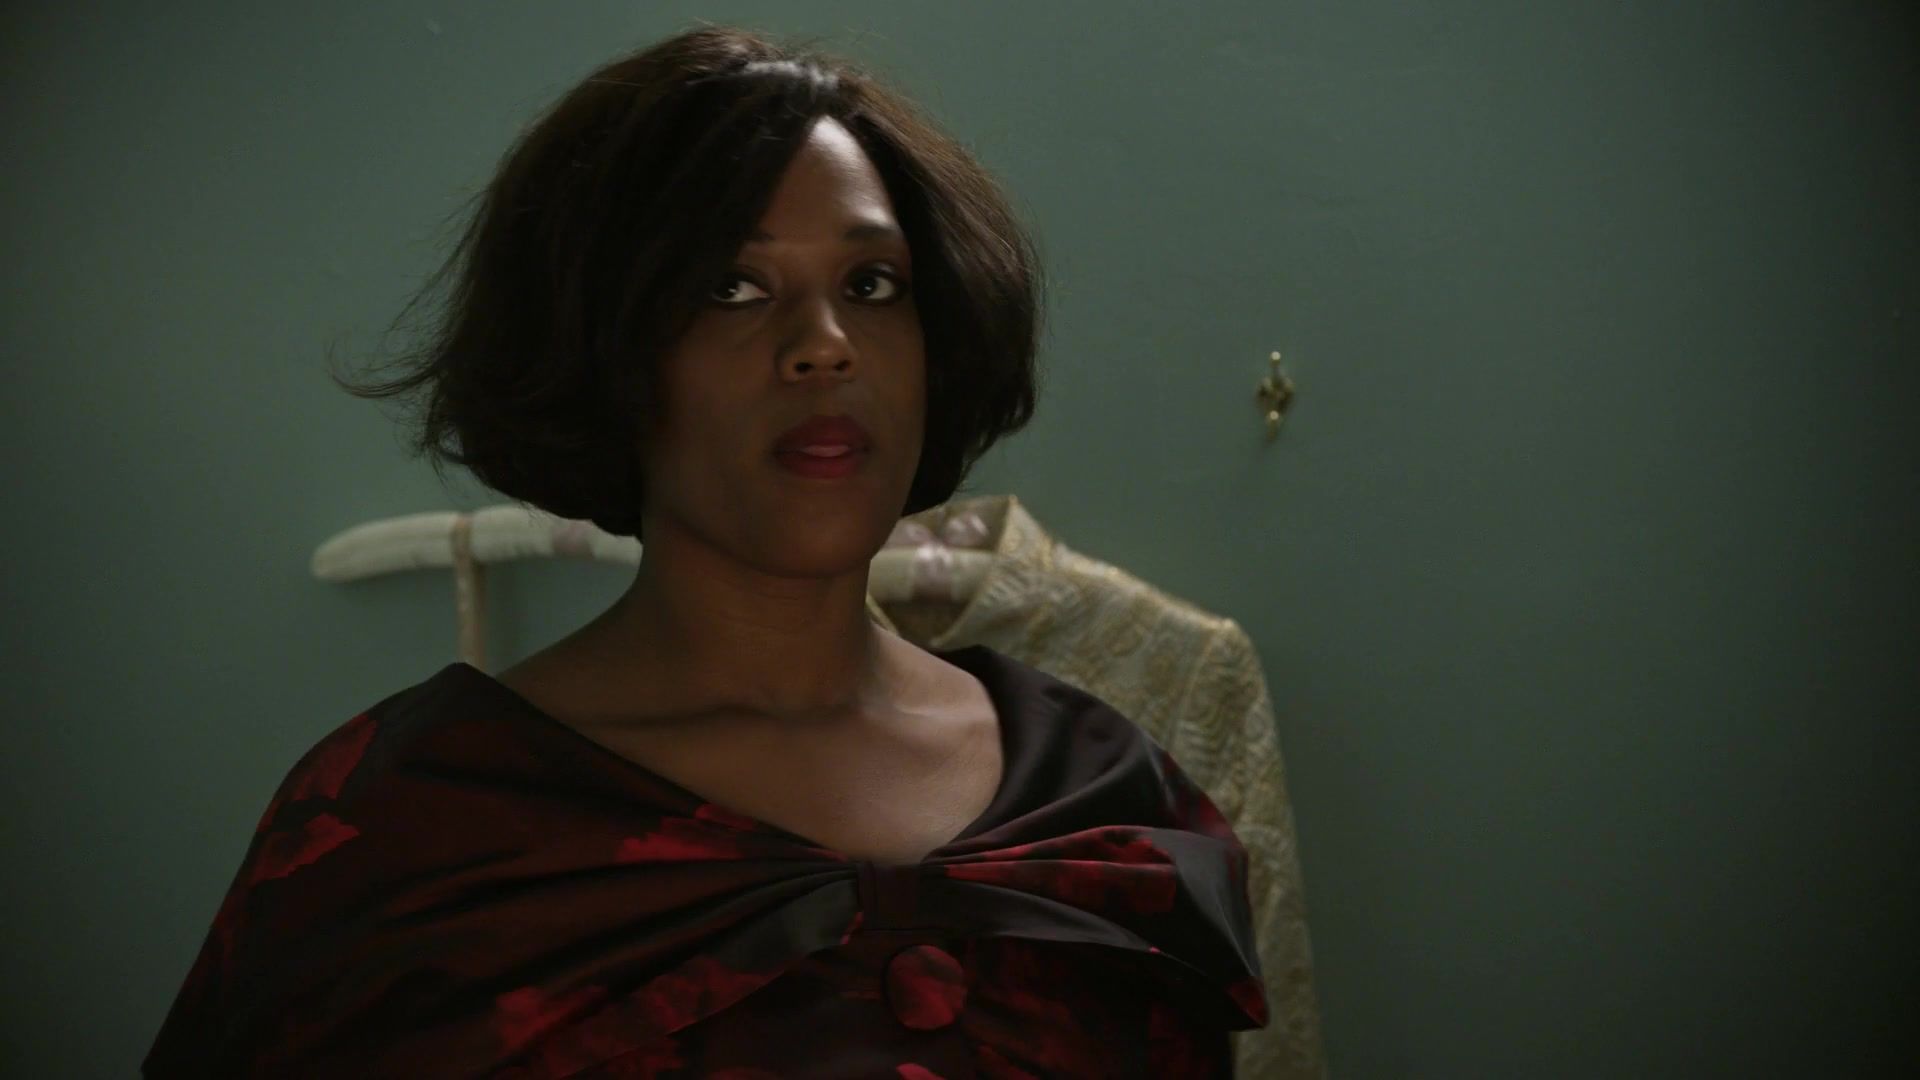 Fuck Nude Antoinette Crowe-Legacy, Kelcy Griffin - Godfather of Harlem s01e03 (2019) Bokep - 1